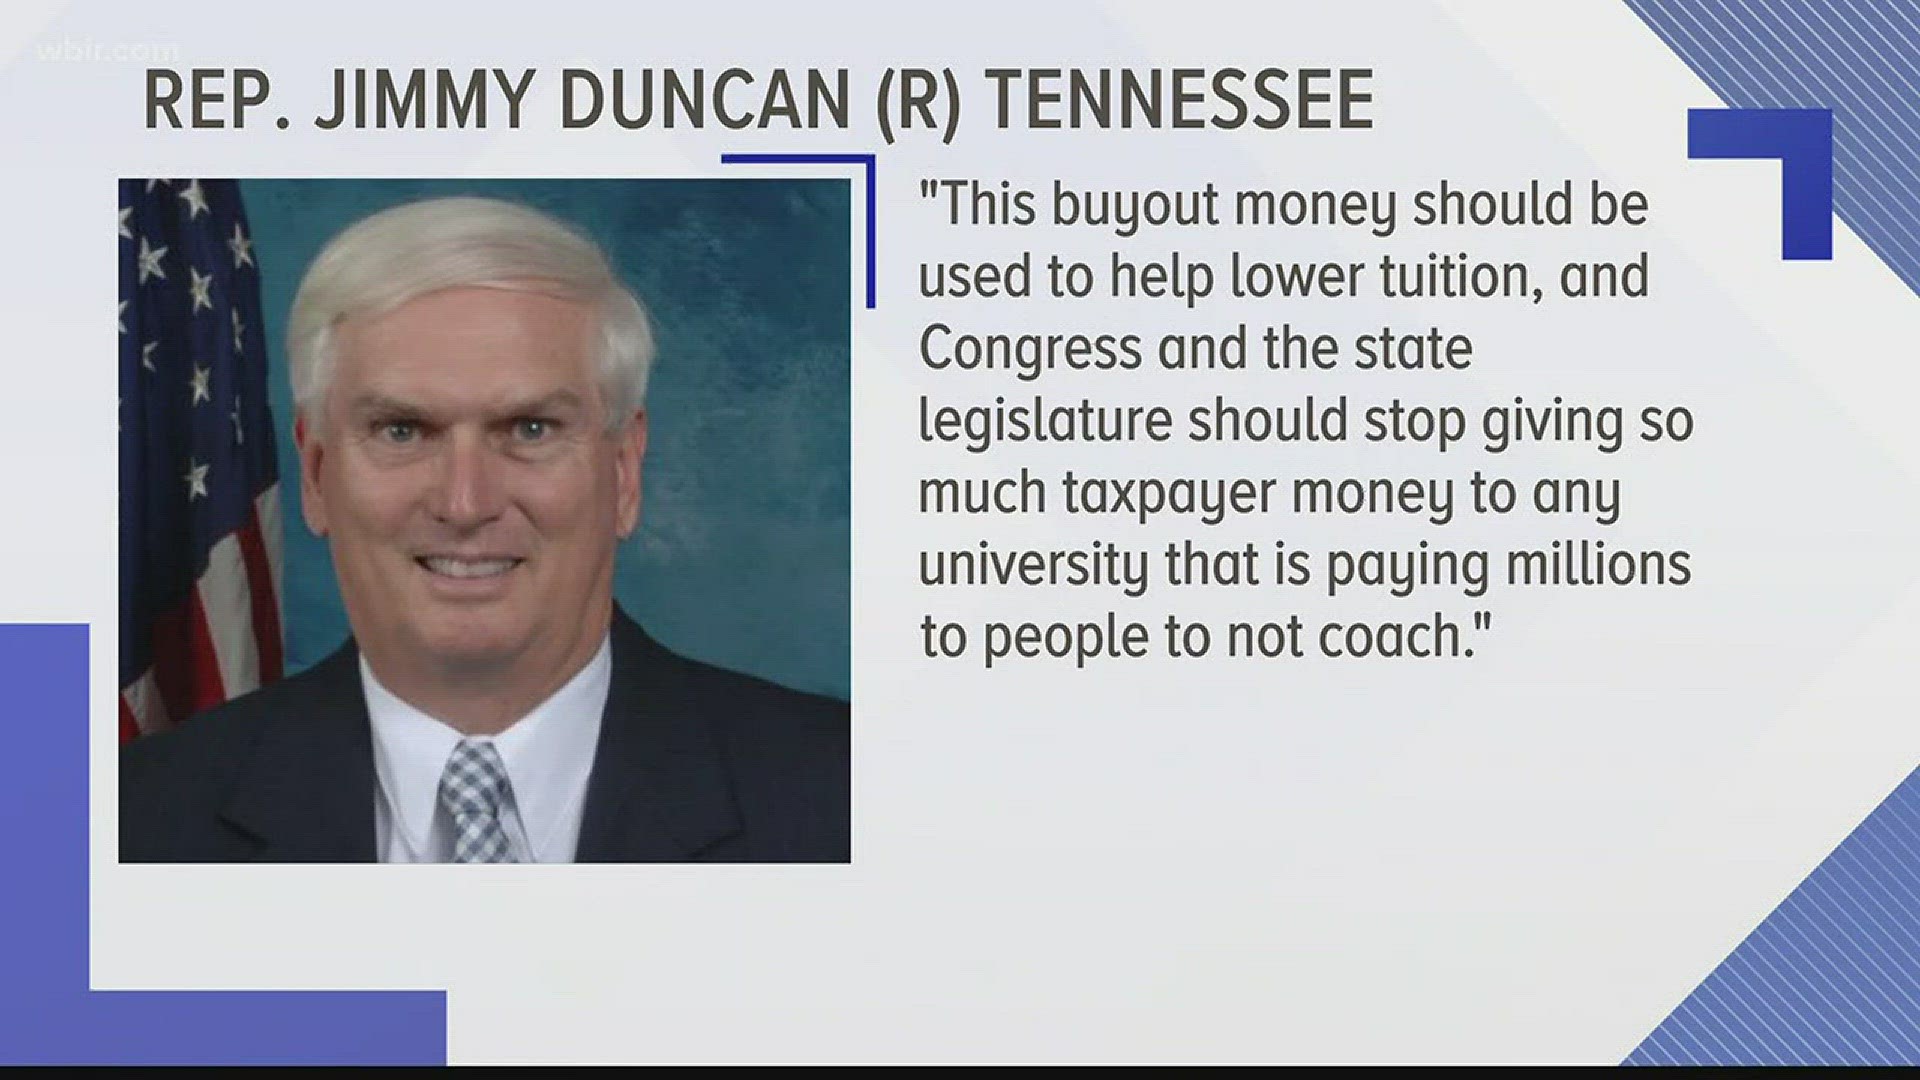 Jan. 2, 2018: U.S. Rep. Jimmy Duncan said he is "disgusted" by the recent buyouts for former Tennessee football coaches.